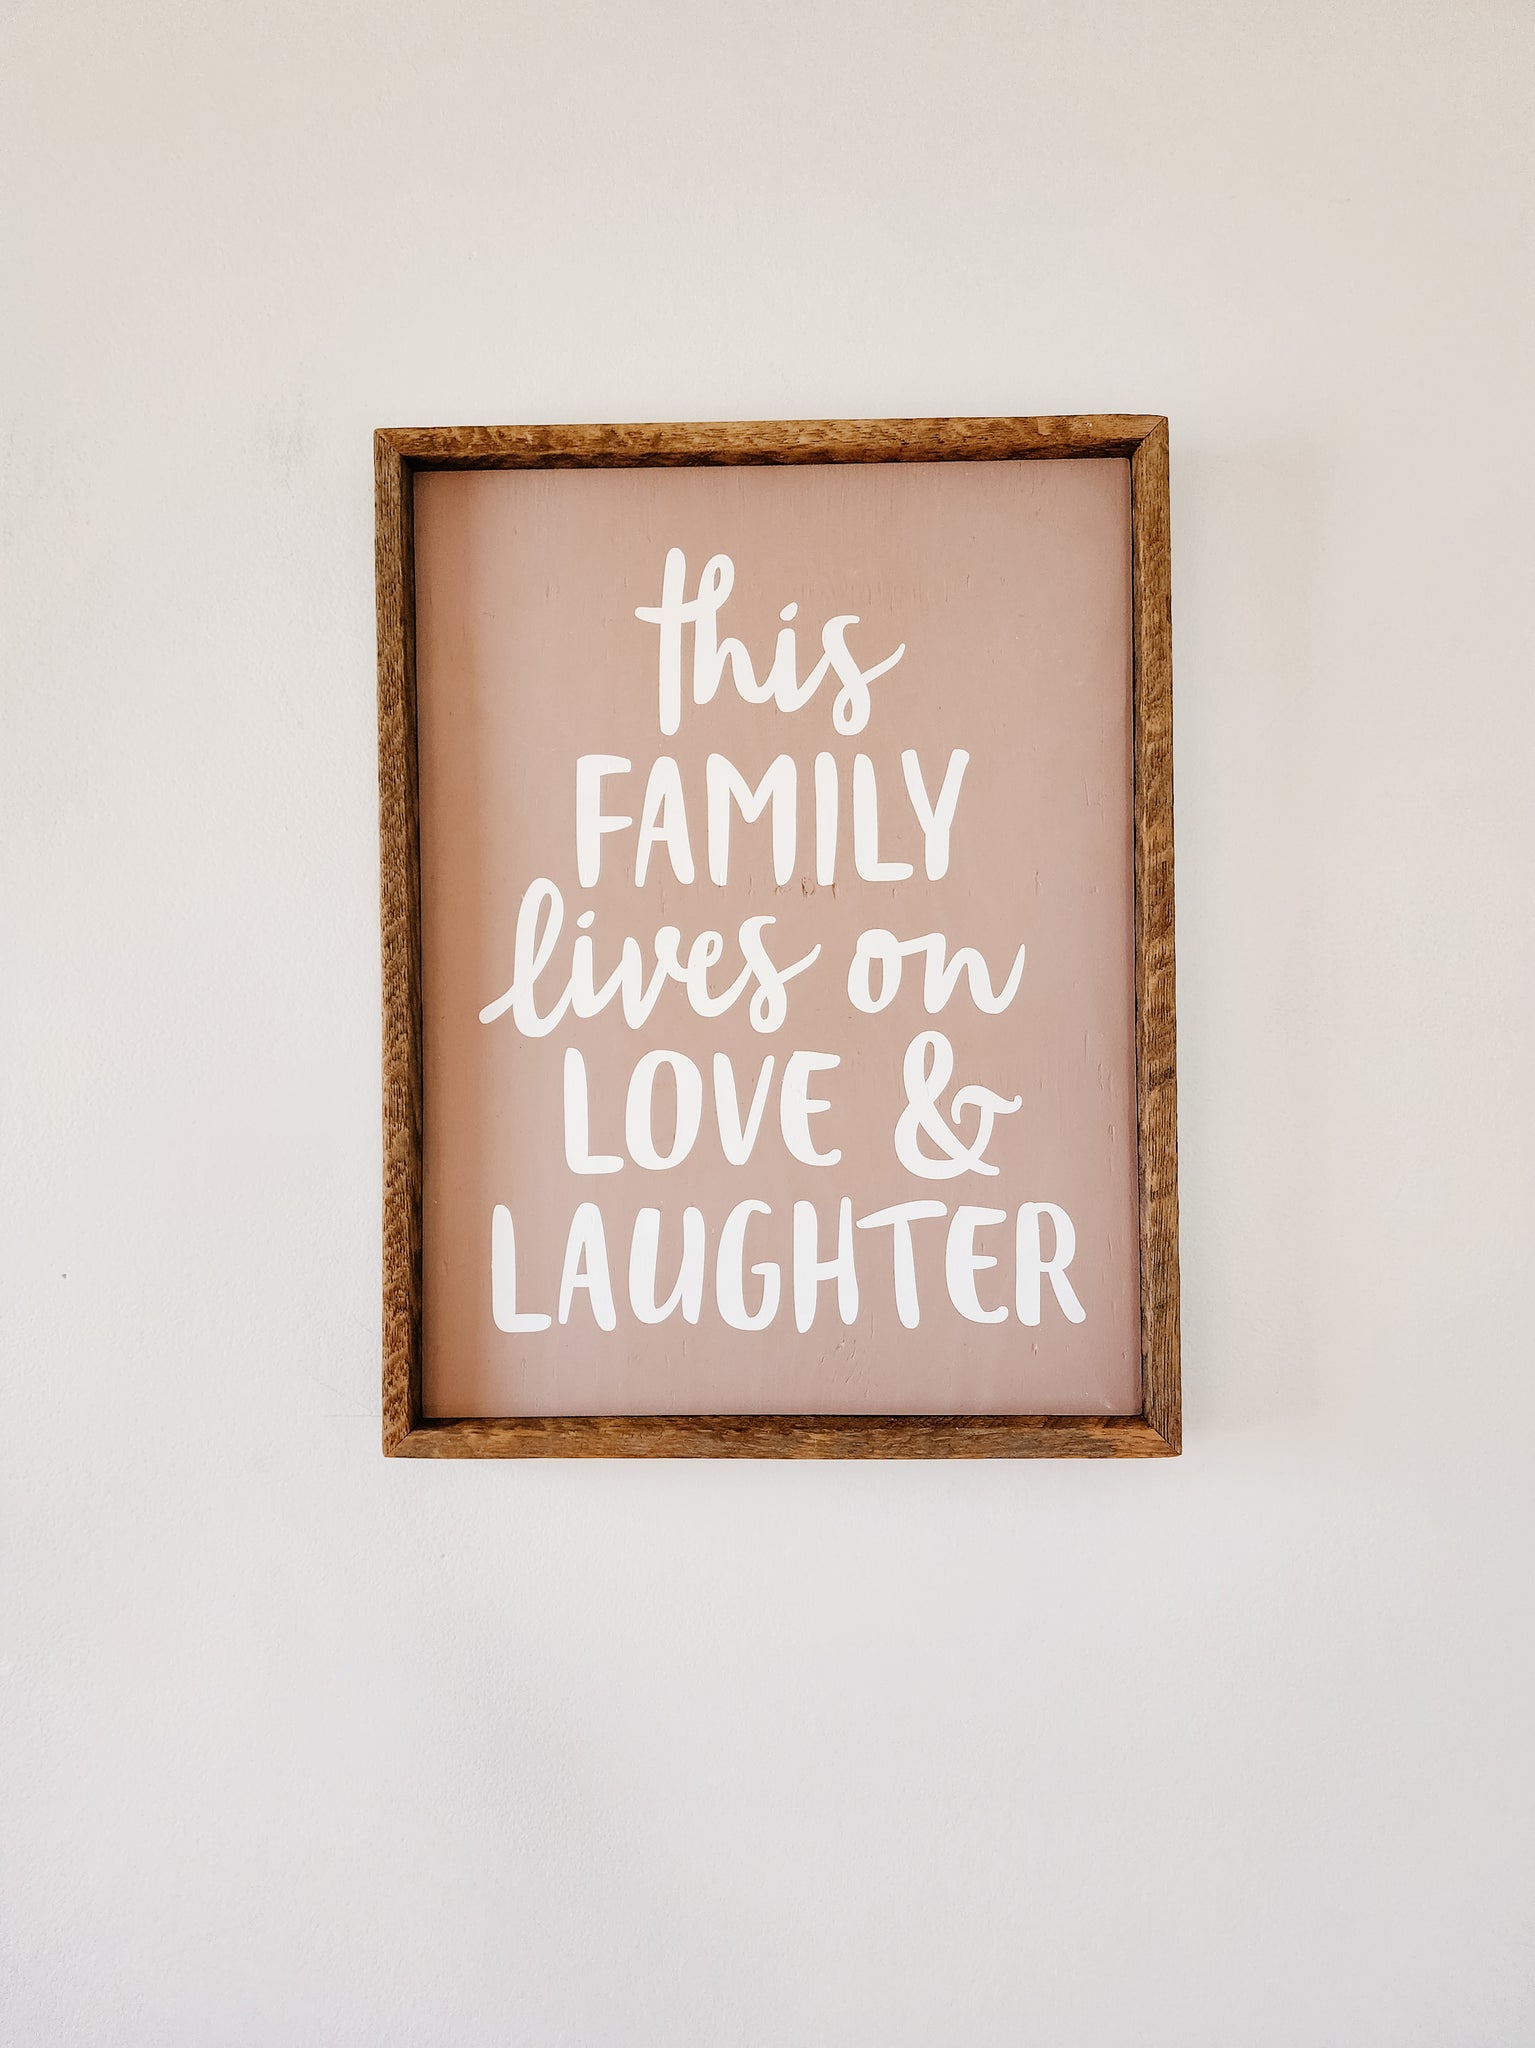 Ruastic 13x17 This family lives on love and laughter sign- dusty pink